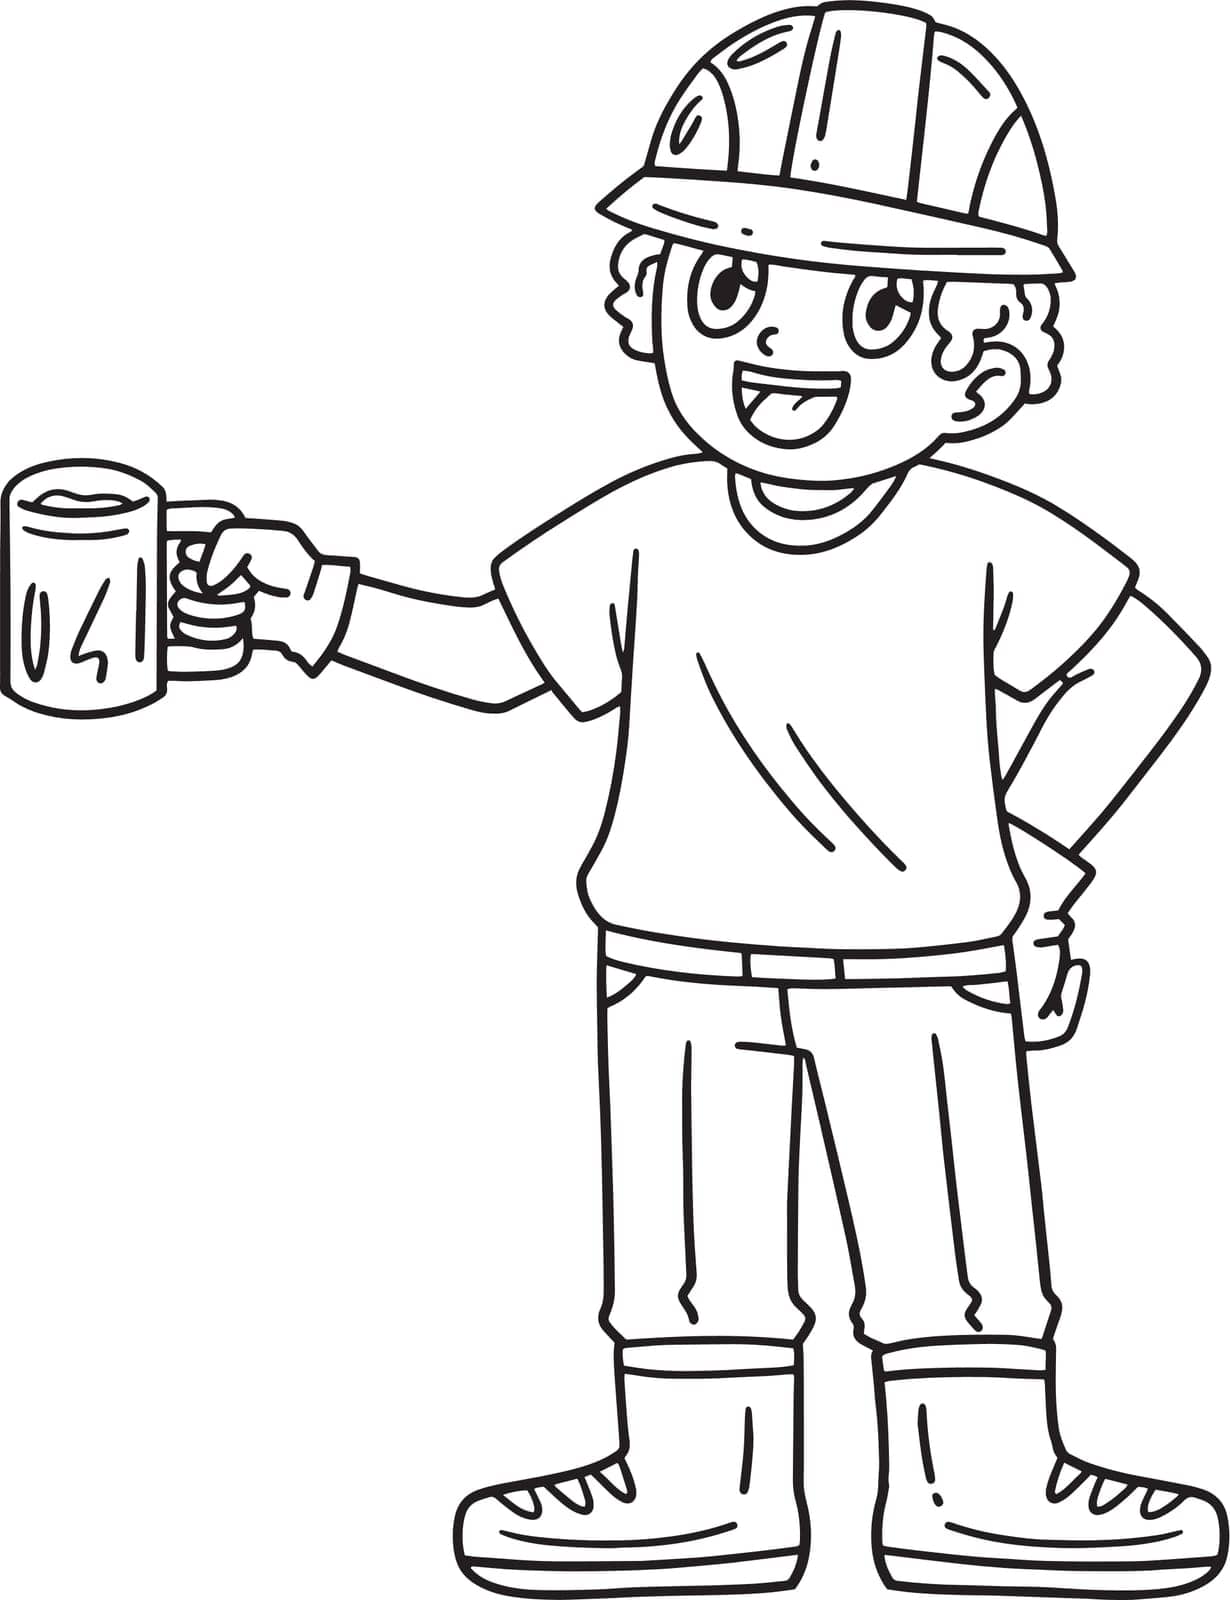 A cute and funny coloring page of a Construction Worker Having a Coffee Break. Provides hours of coloring fun for children. To color, this page is very easy. Suitable for little kids and toddlers.